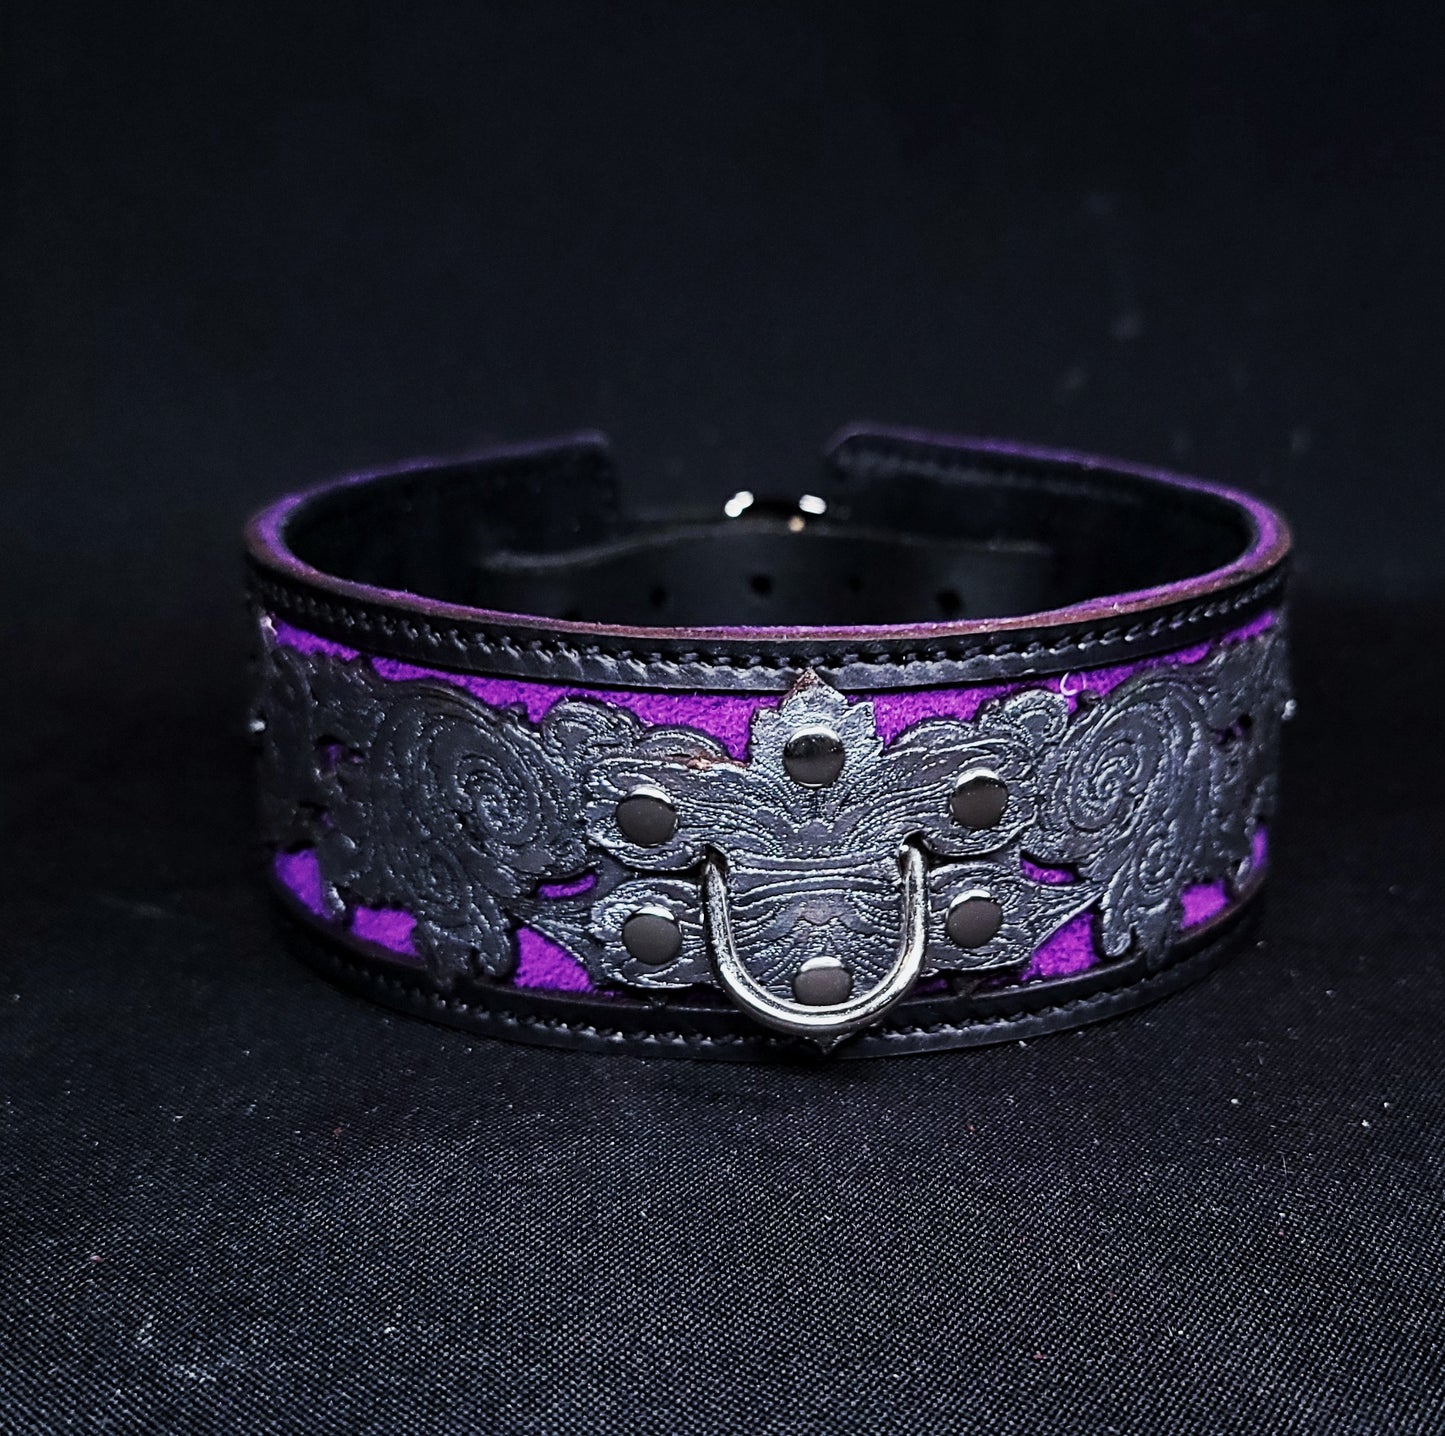 Venice on Fire Band Collar in Purple- In Stock